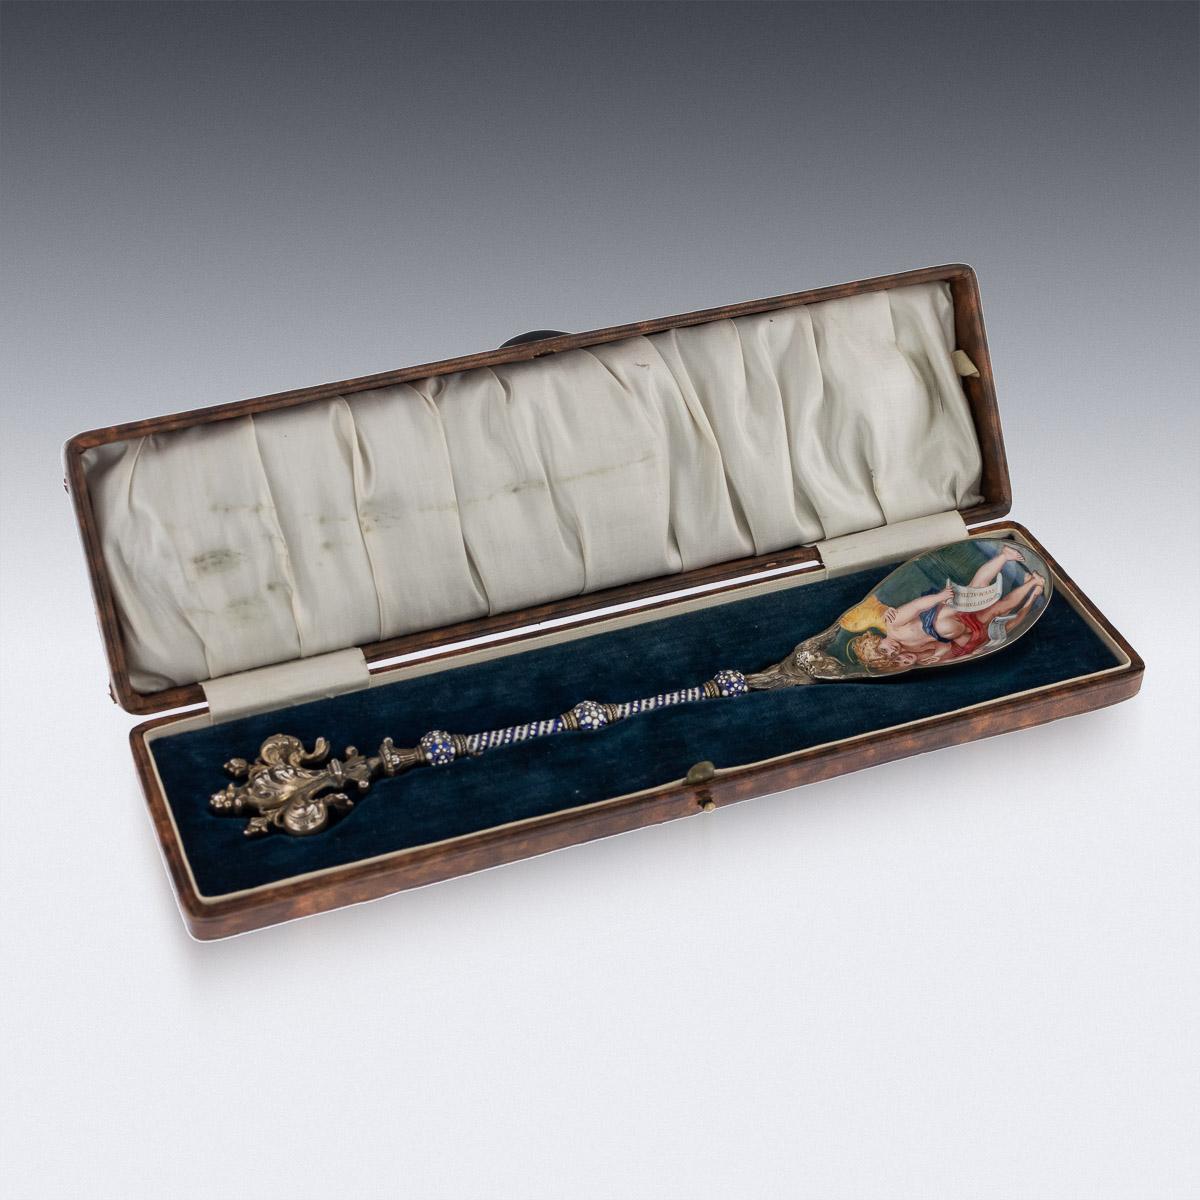 Antique 19th century Austrian solid silver-gilt and enameled large presentation spoon, silver richly gilt and spoons inner-bowl and stem beautifully enamelled depicting Renaissance inspired scene depicting a pair of angels, extremely well painted,